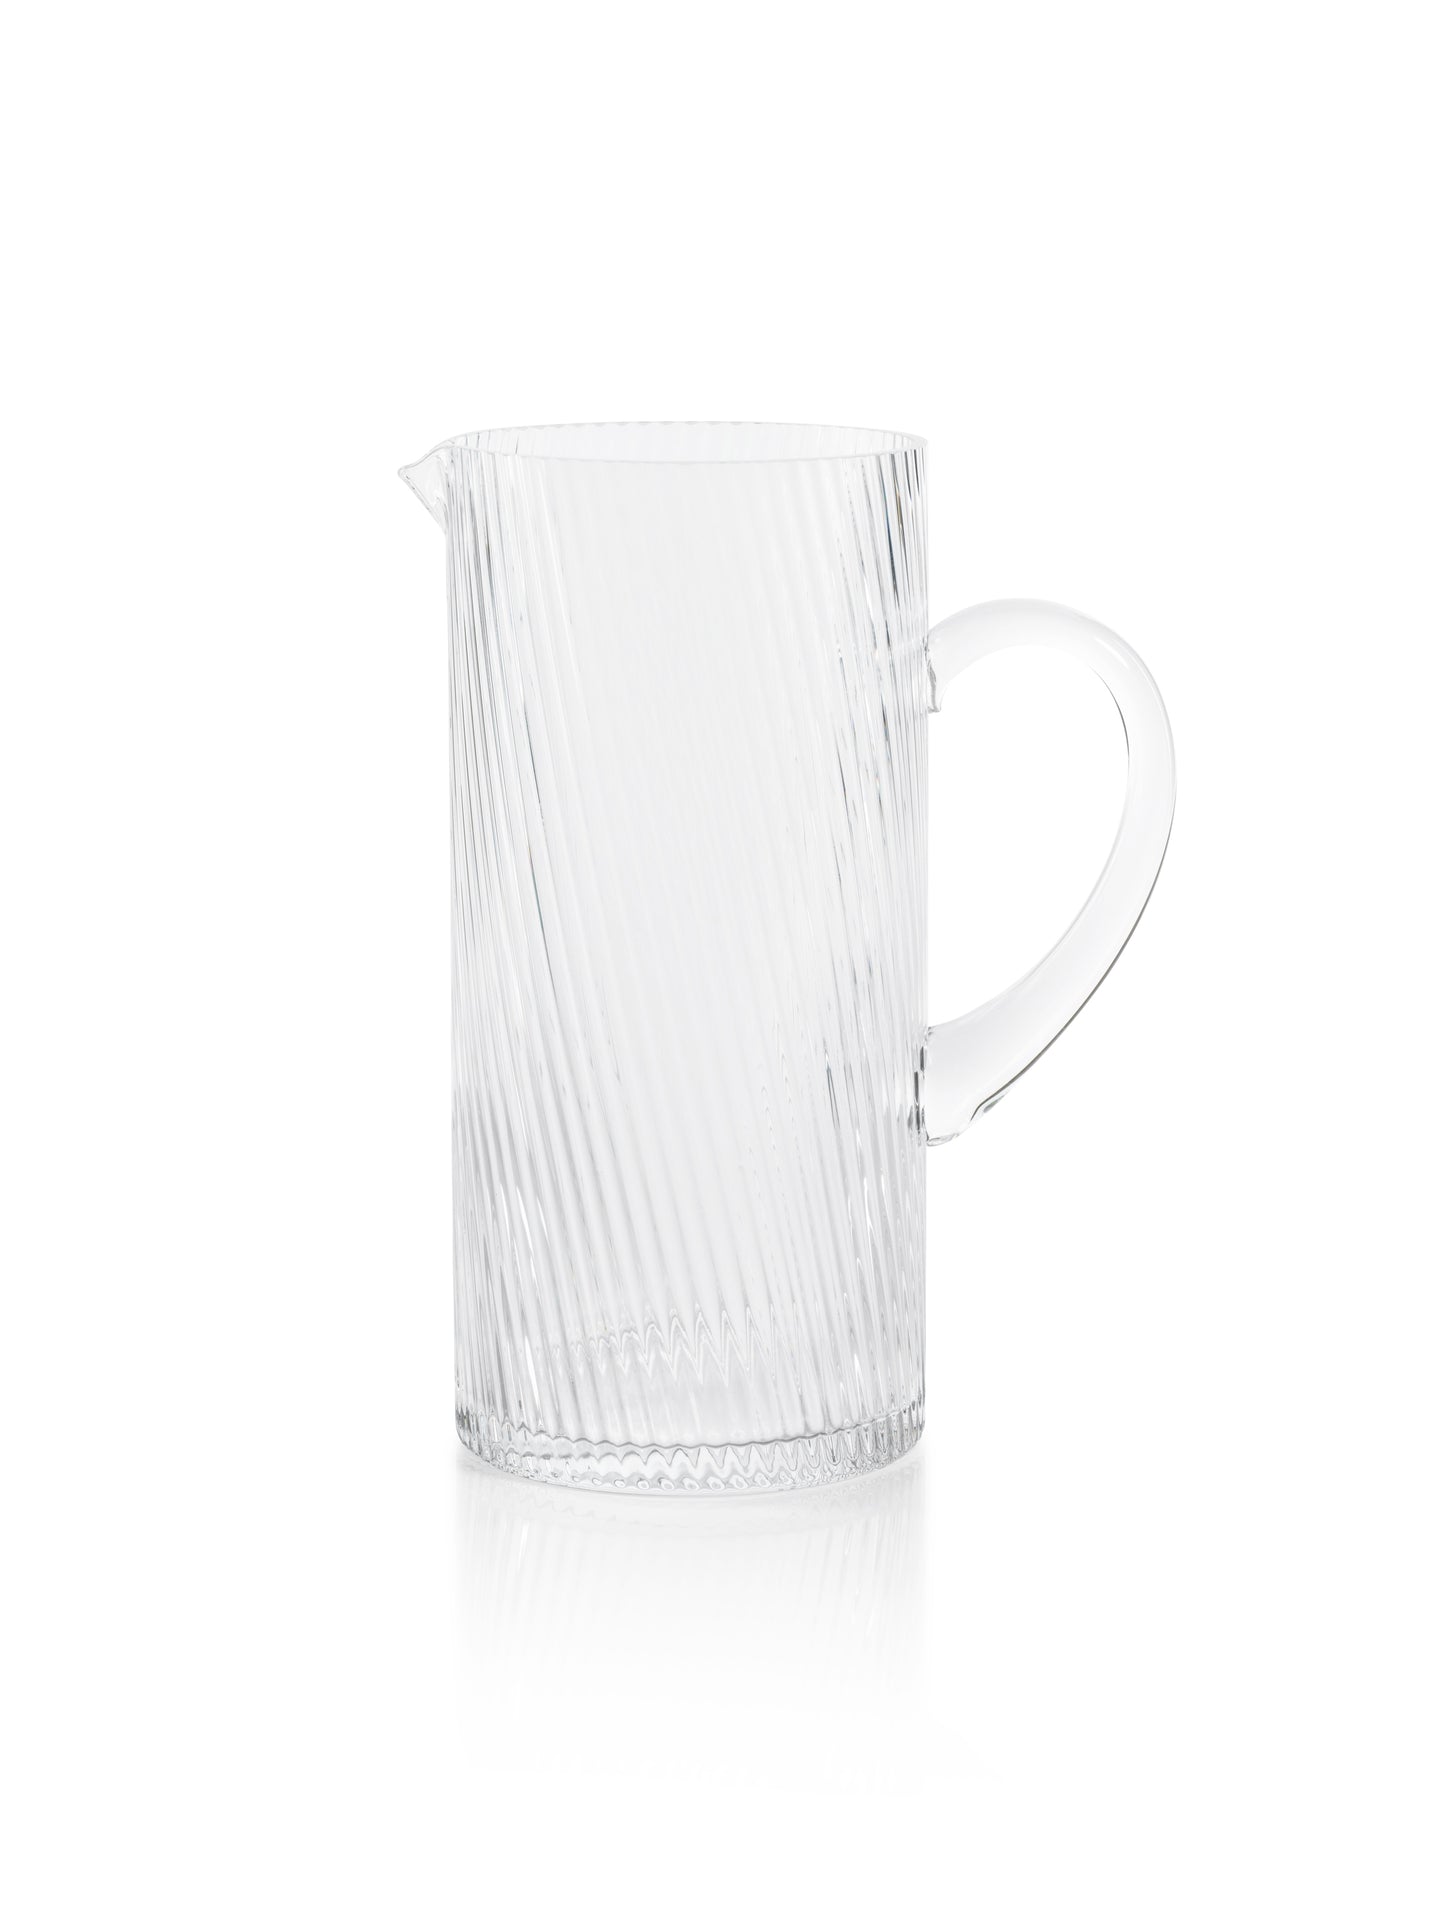 The Connaught Ripple Pitcher